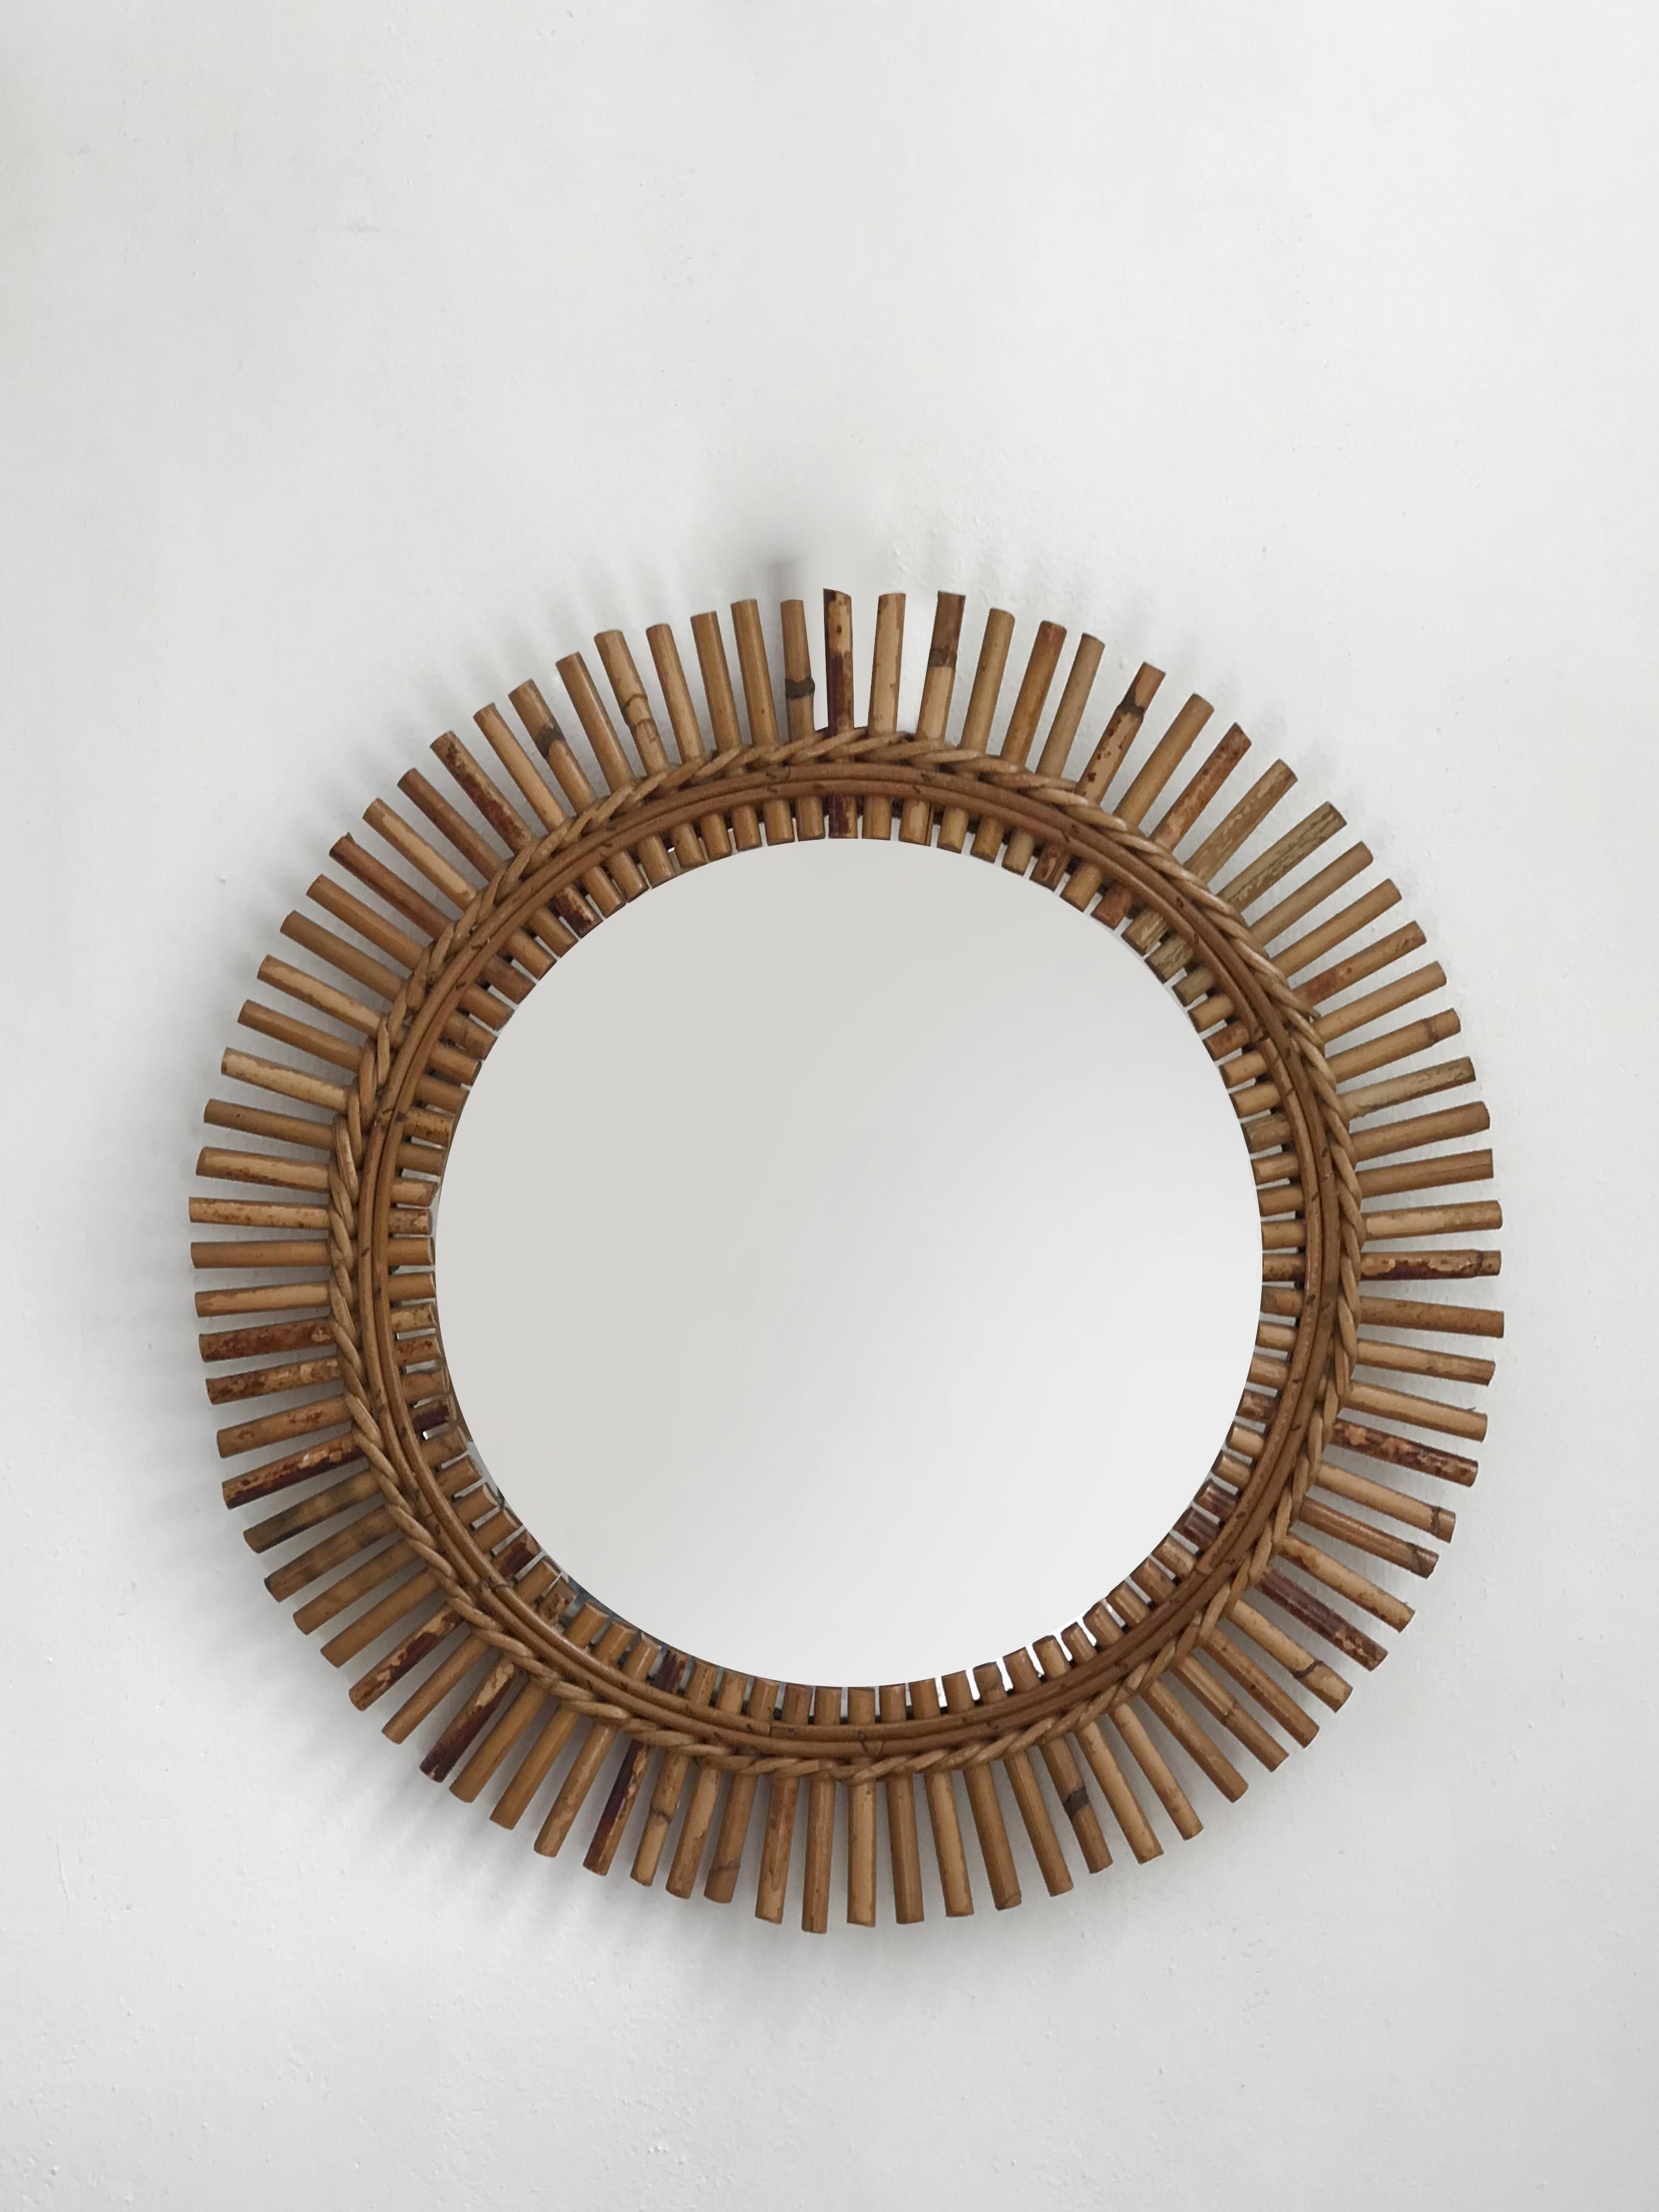 Italian Mid-Century Modern design bamboo rattan circle wall mirror, 1960s

Please note that the items is original of the period and this shows normal signs of age and use.